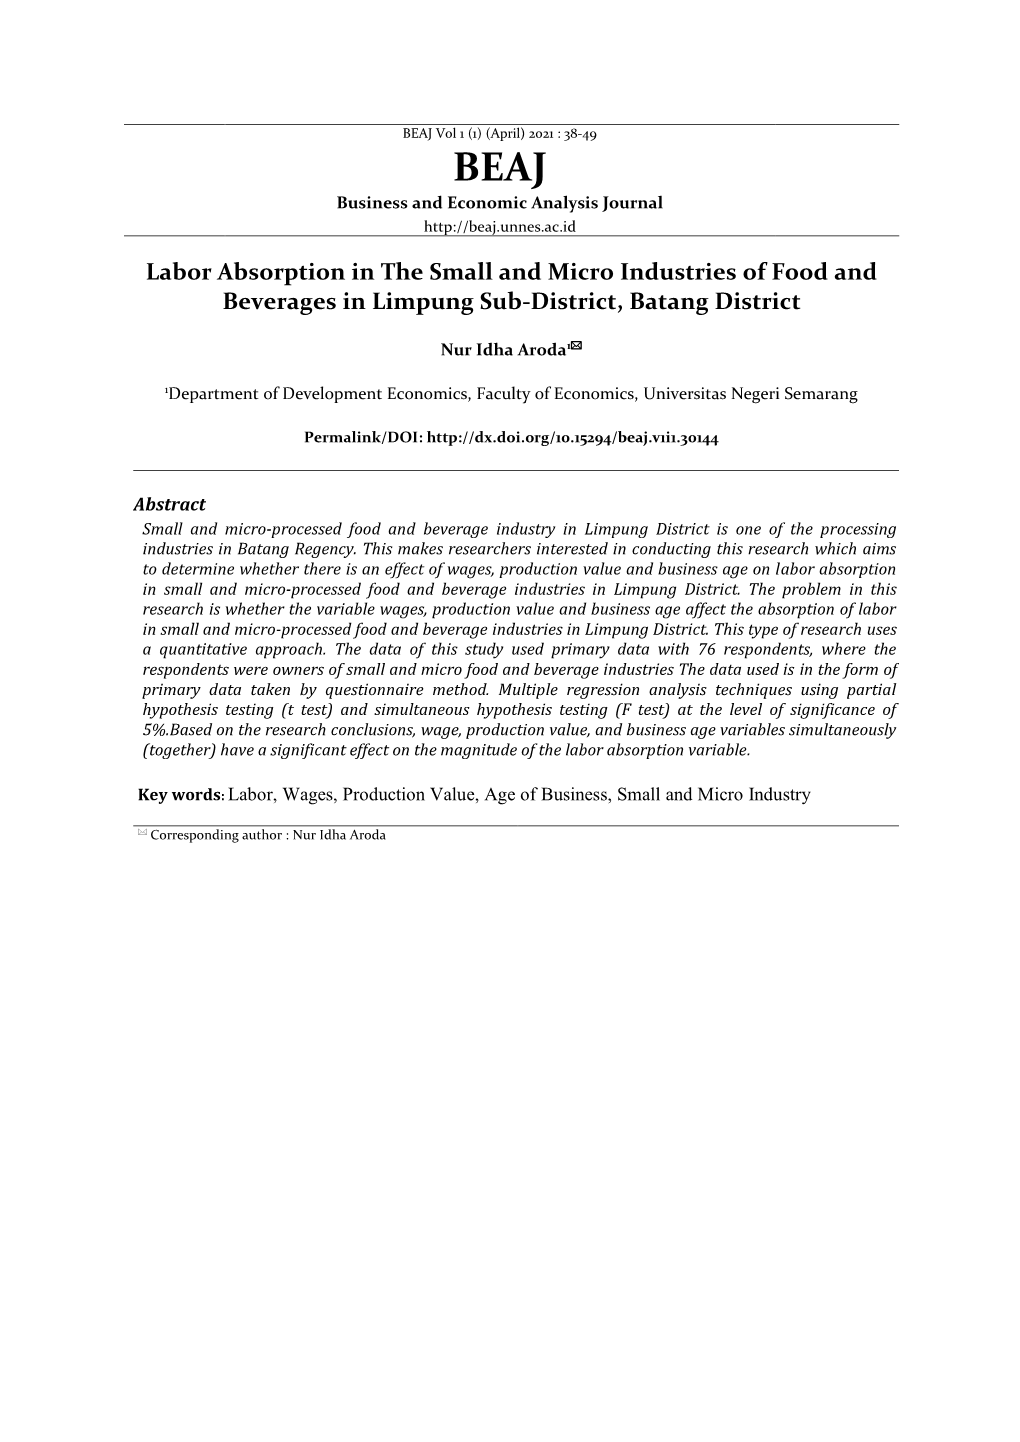 Labor Absorption in the Small and Micro Industries of Food and Beverages in Limpung Sub-District, Batang District